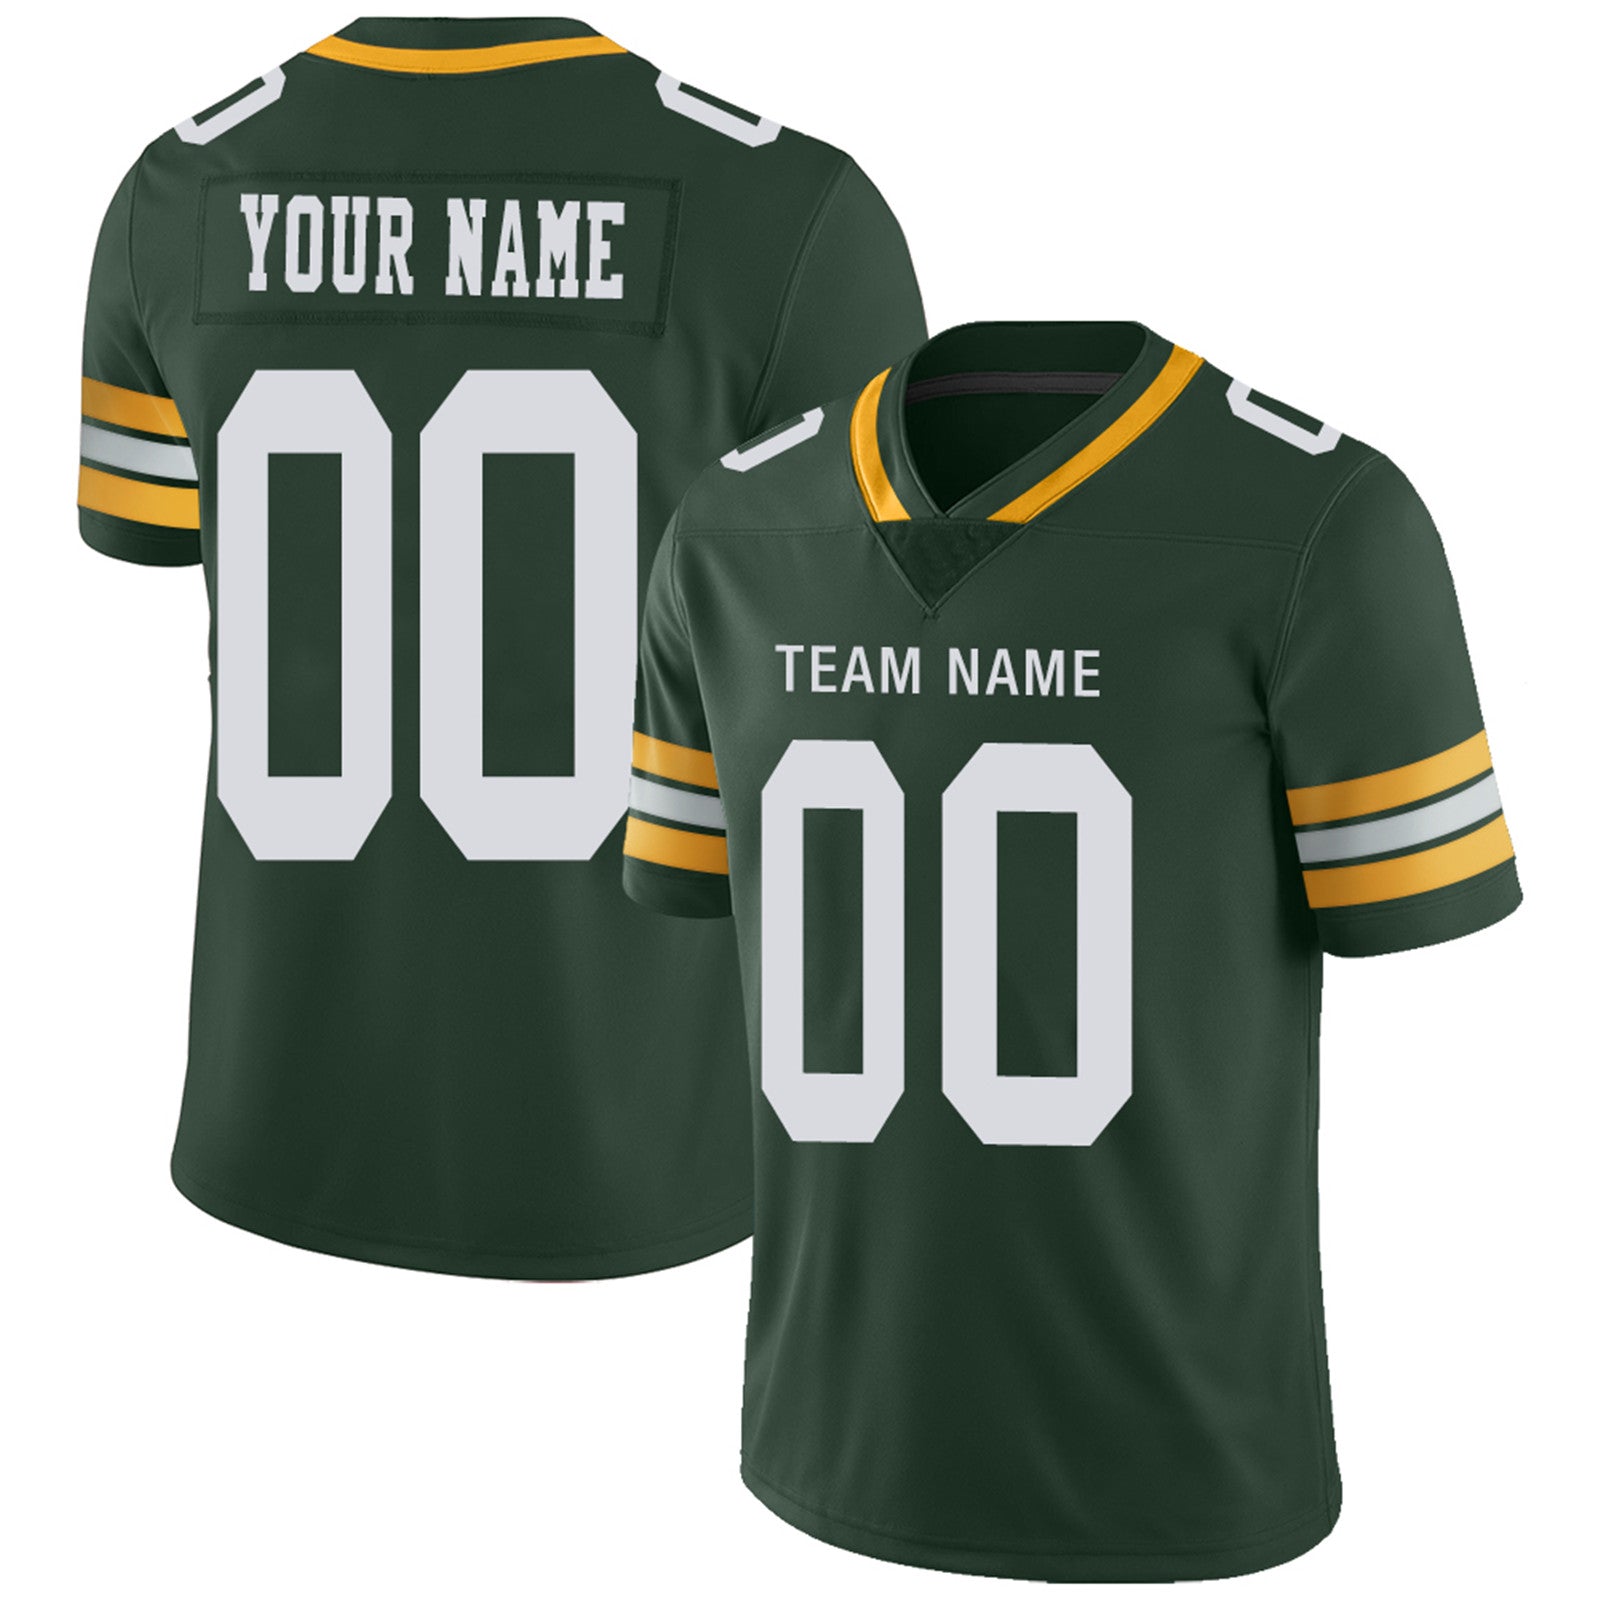 Custom GB.Packers Football Jerseys Team Player or Personalized